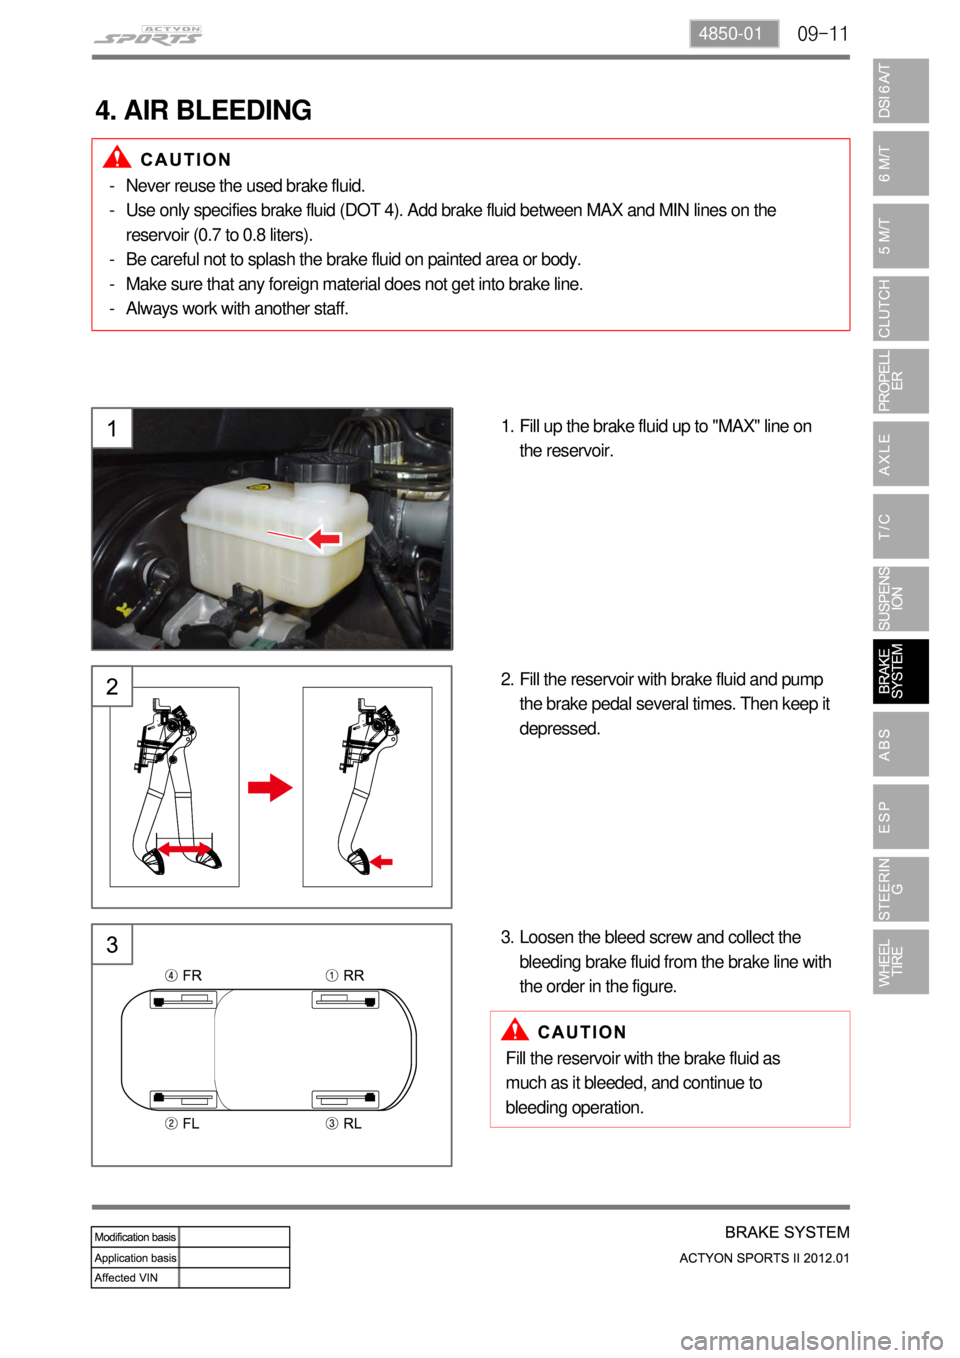 SSANGYONG NEW ACTYON SPORTS 2012  Service Manual 09-114850-01
4. AIR BLEEDING
Fill up the brake fluid up to "MAX" line on 
the reservoir. 1.
Fill the reservoir with brake fluid and pump 
the brake pedal several times. Then keep it 
depressed. 2.
Loo